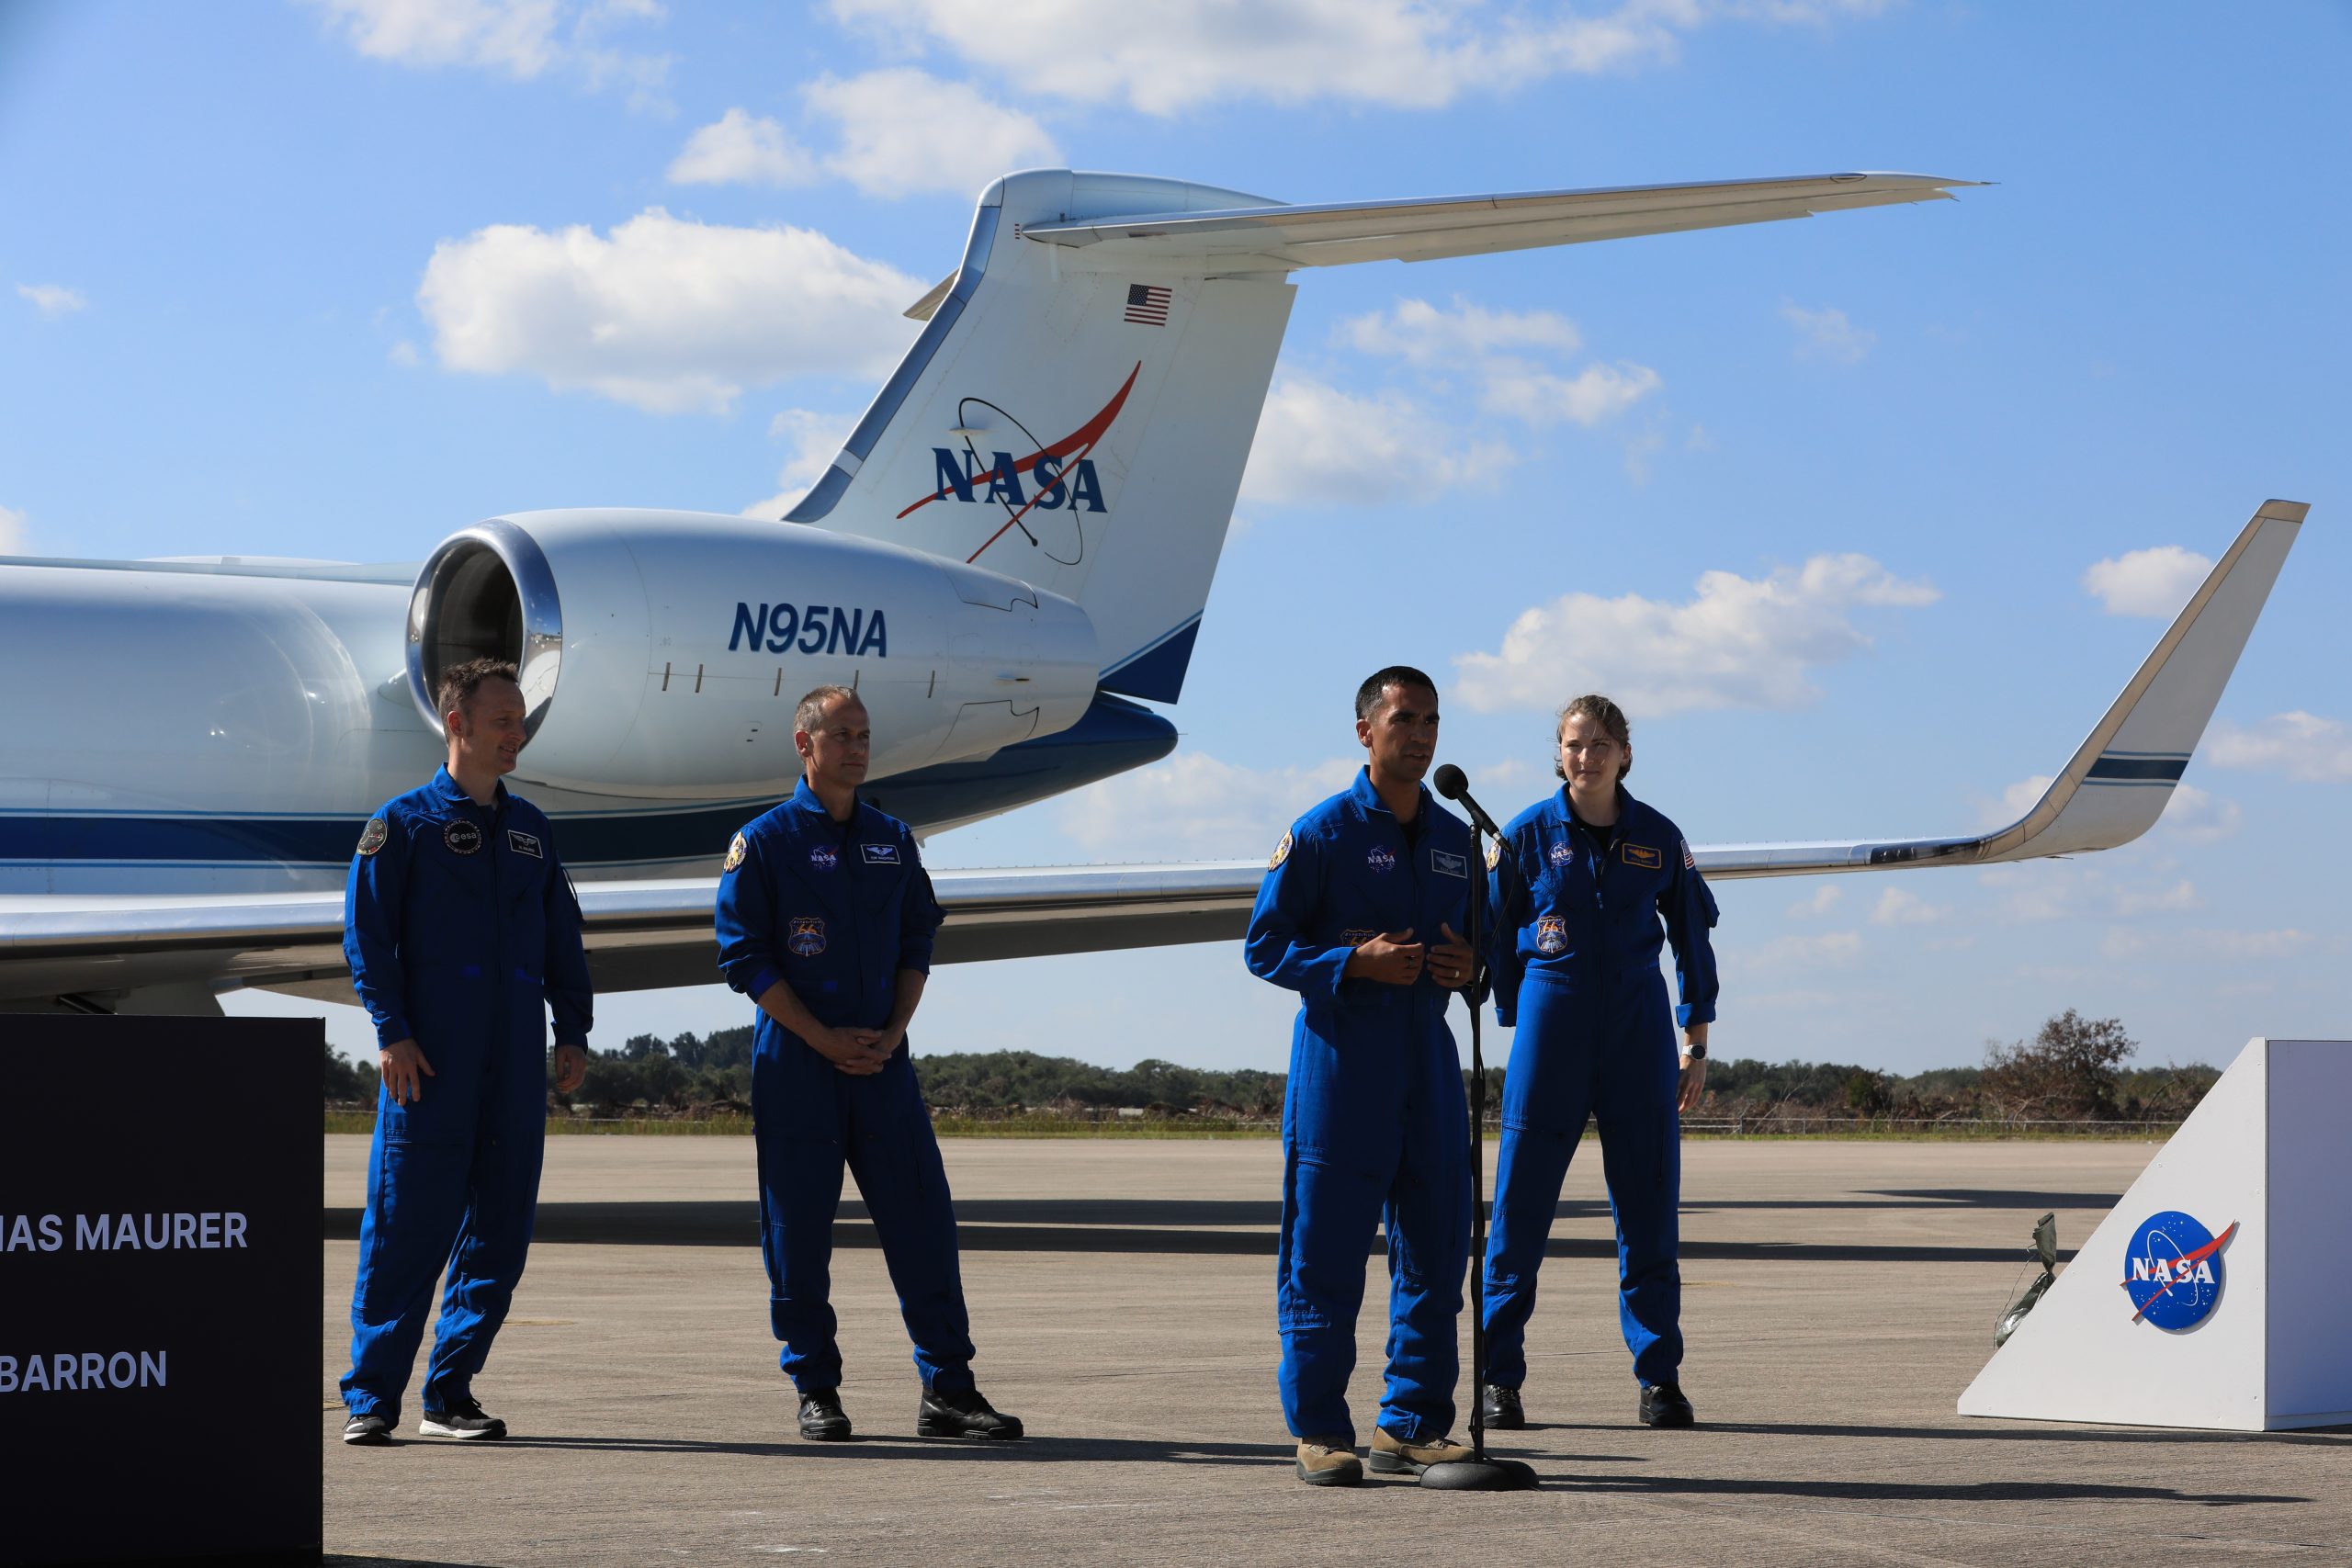 The astronauts who will fly on NASA’s SpaceX Crew-3 mission participate in a media event following their arrival at the agency’s Kennedy Space Center in Florida on Oct. 26, 2021. Speaking at the microphone is NASA astronaut and spacecraft commander Raja Chari. Behind him from left is European Space Agency astronaut and mission specialist Matthias Maurer, and NASA astronauts Tom Marshburn, pilot, and Kayla Barron, mission specialist.